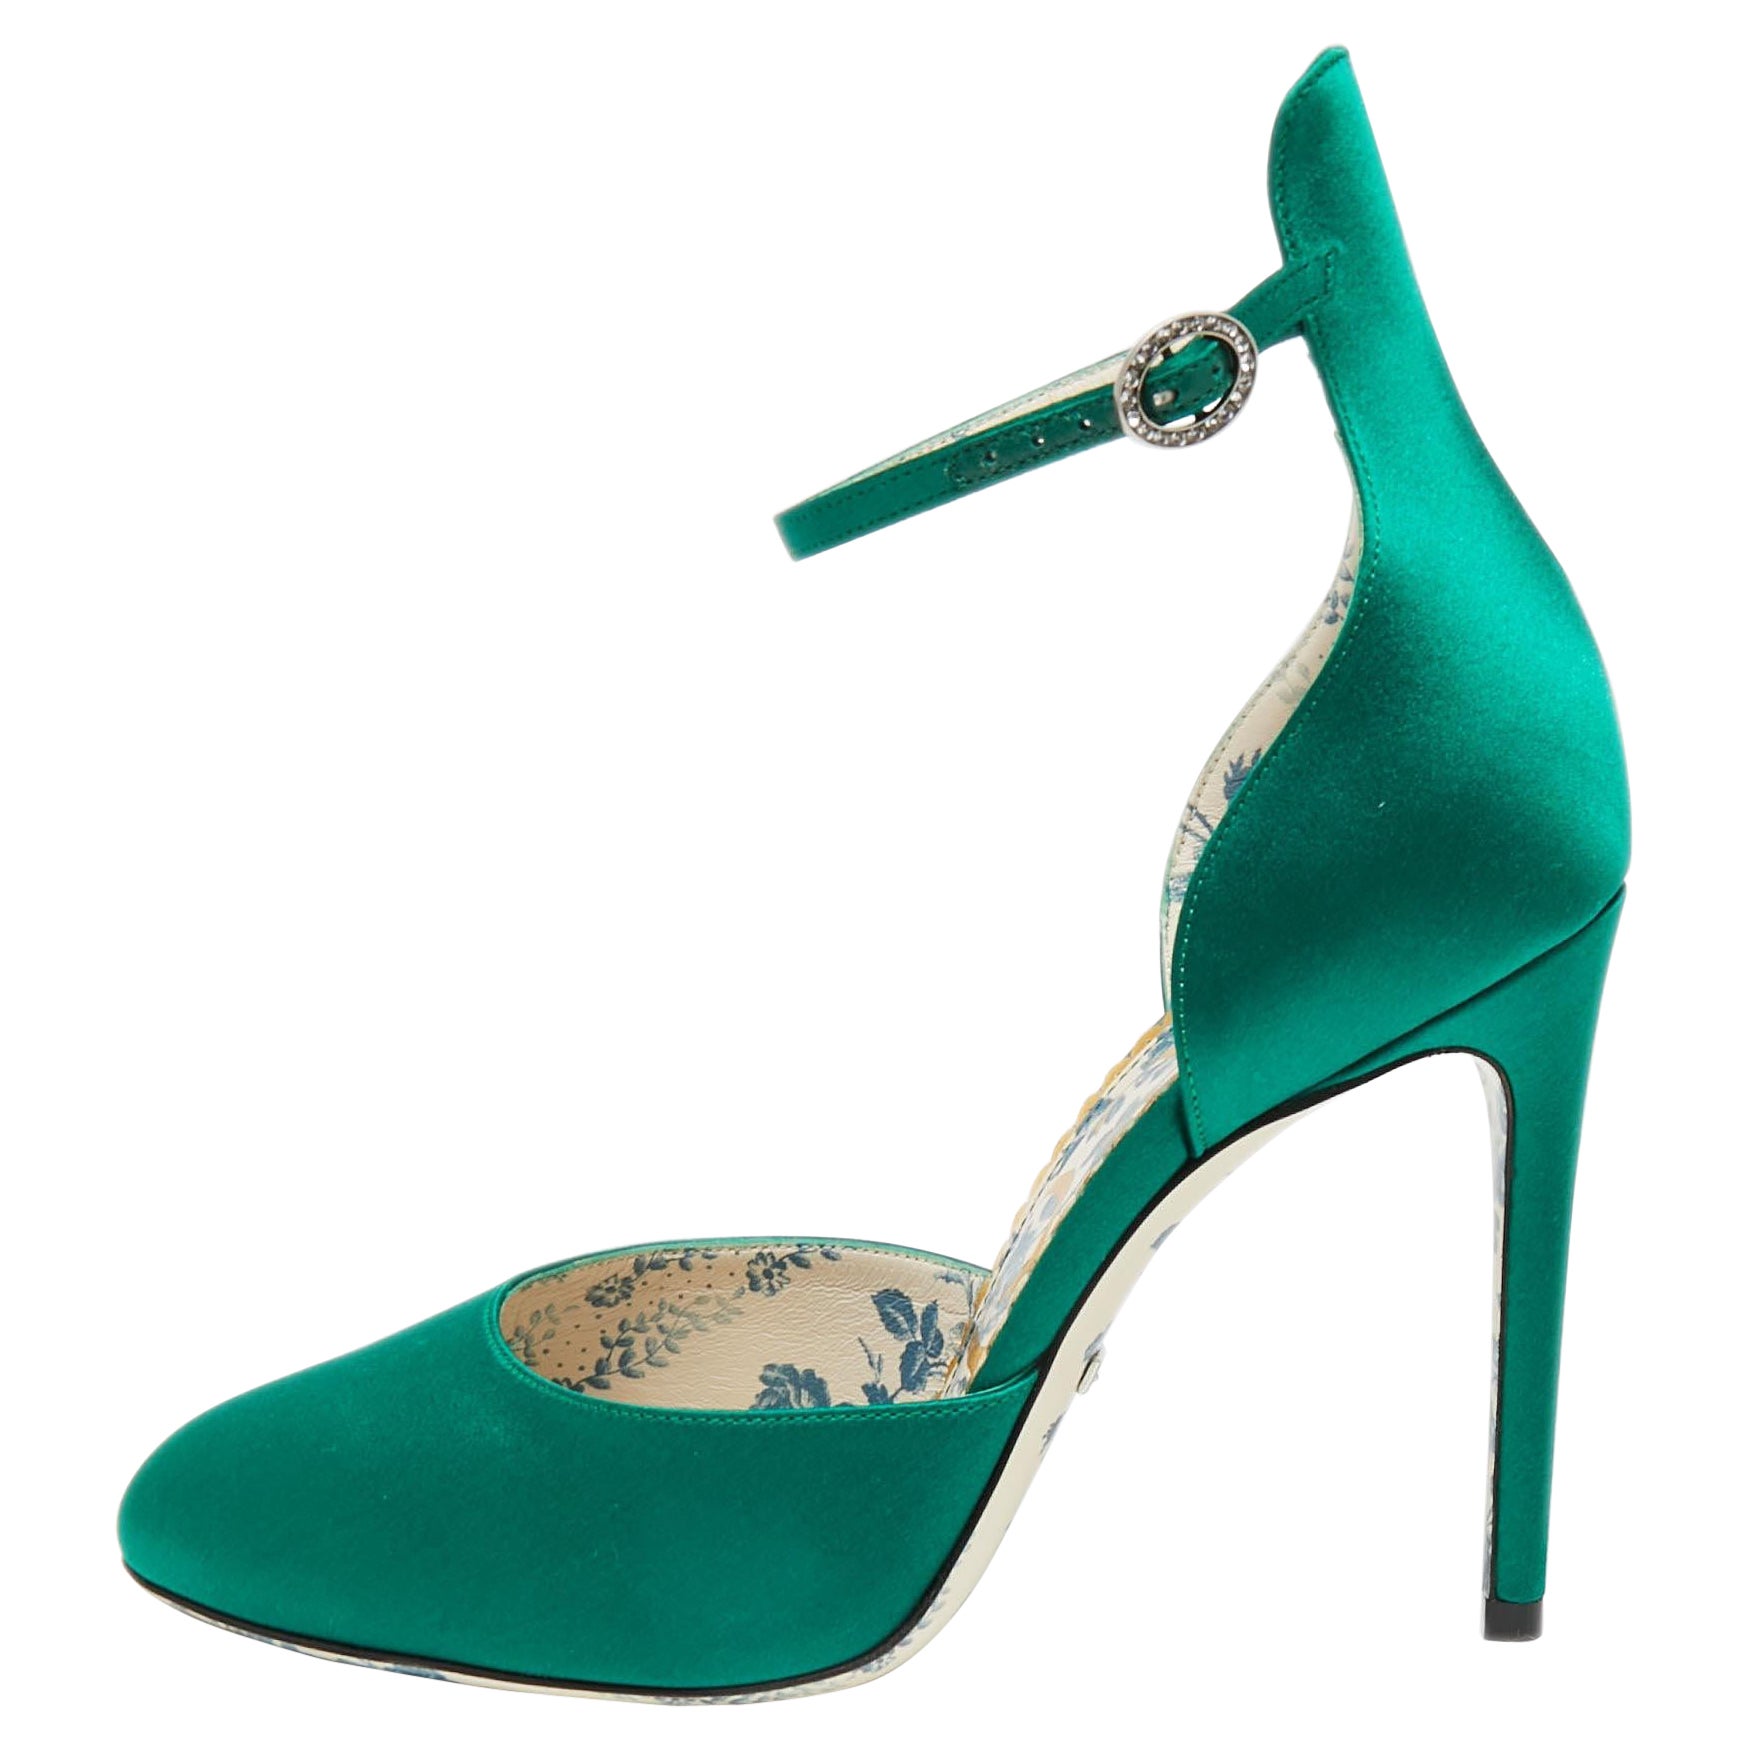 Gucci Green Satin Daisy Ankle-Strap Pumps Size 37.5